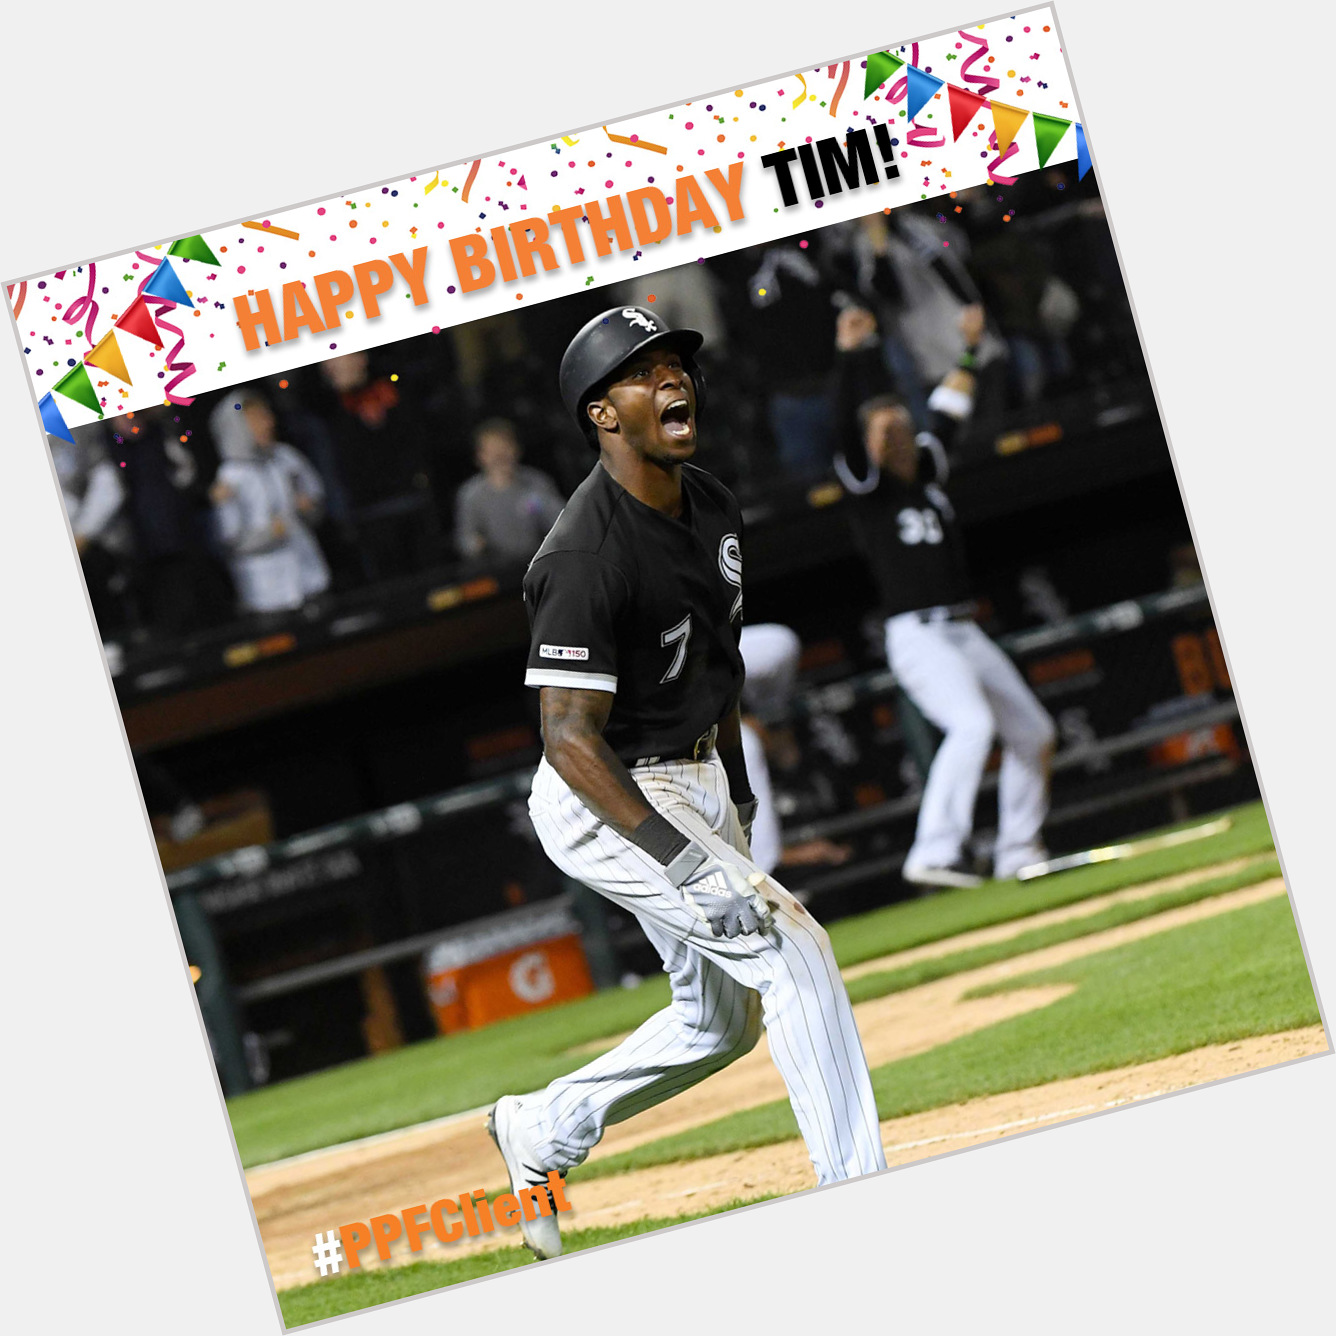 Wishing a very happy birthday to and 2019 AL Batting Champion Tim Anderson ( 